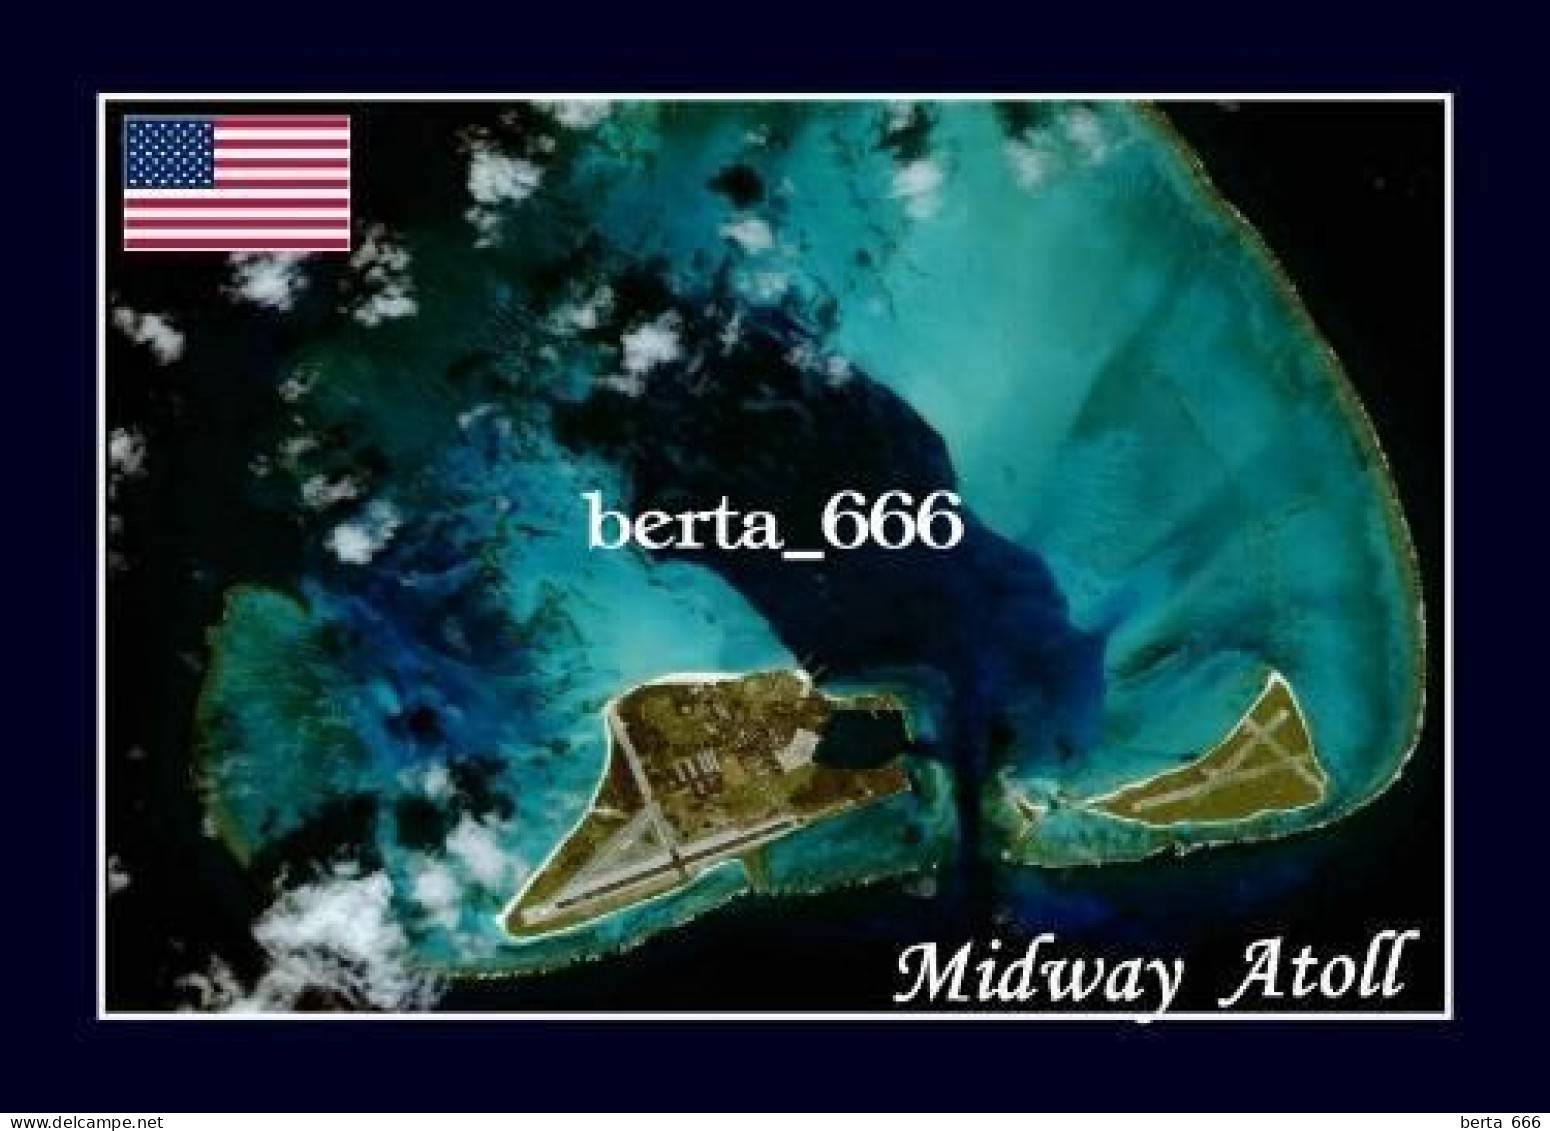 United States Midway Atoll Satellite View New Postcard - Midway